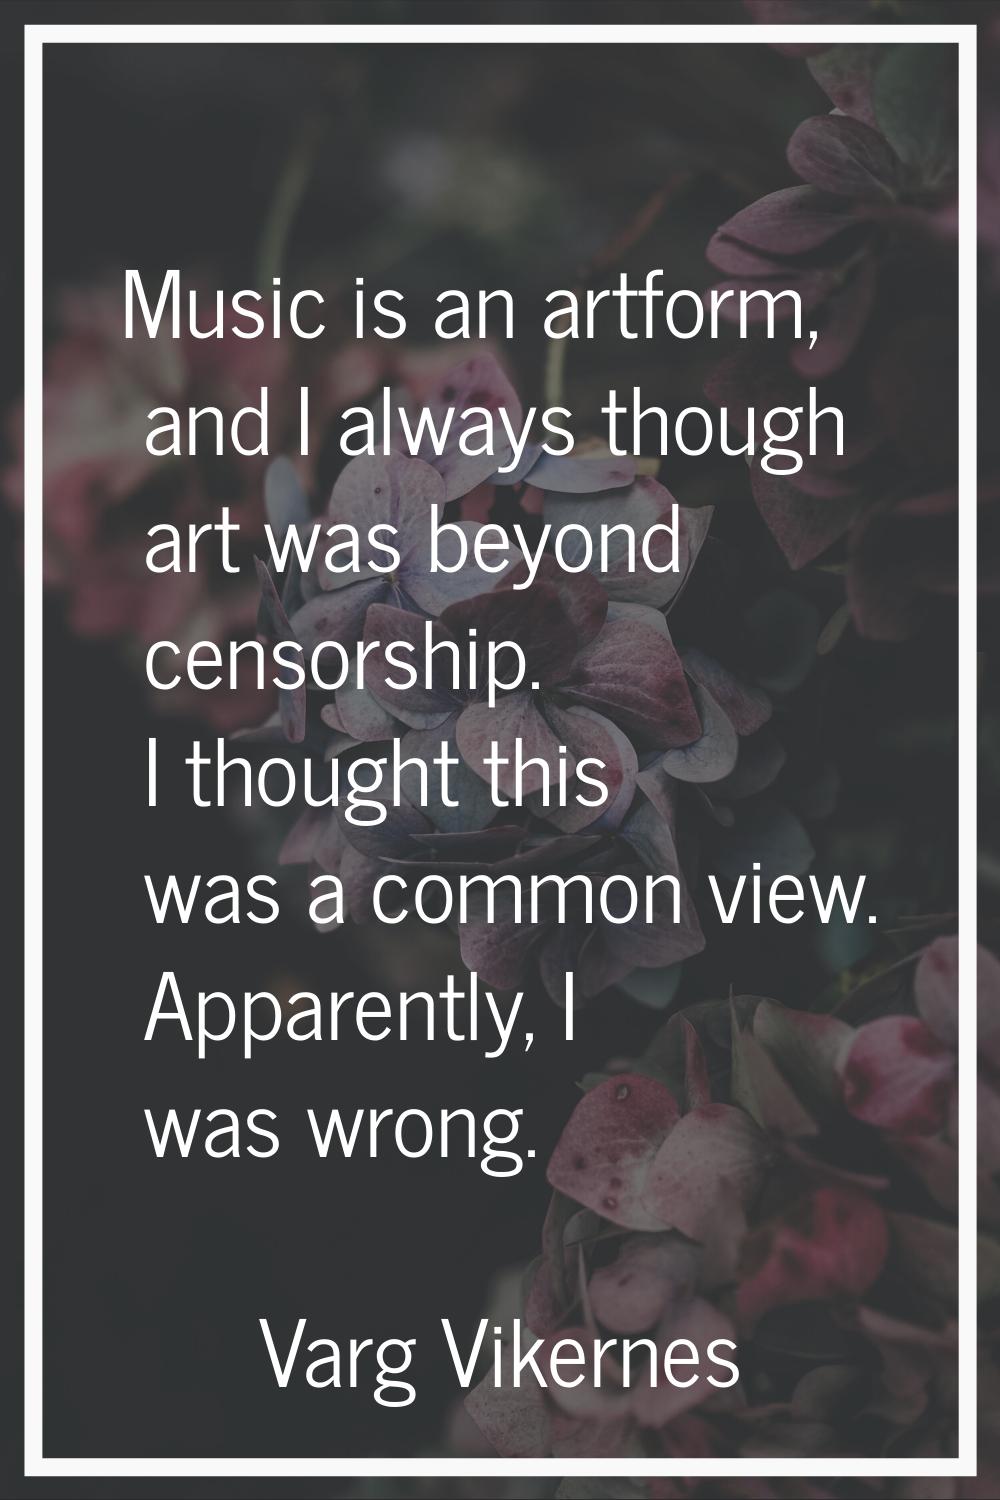 Music is an artform, and I always though art was beyond censorship. I thought this was a common vie